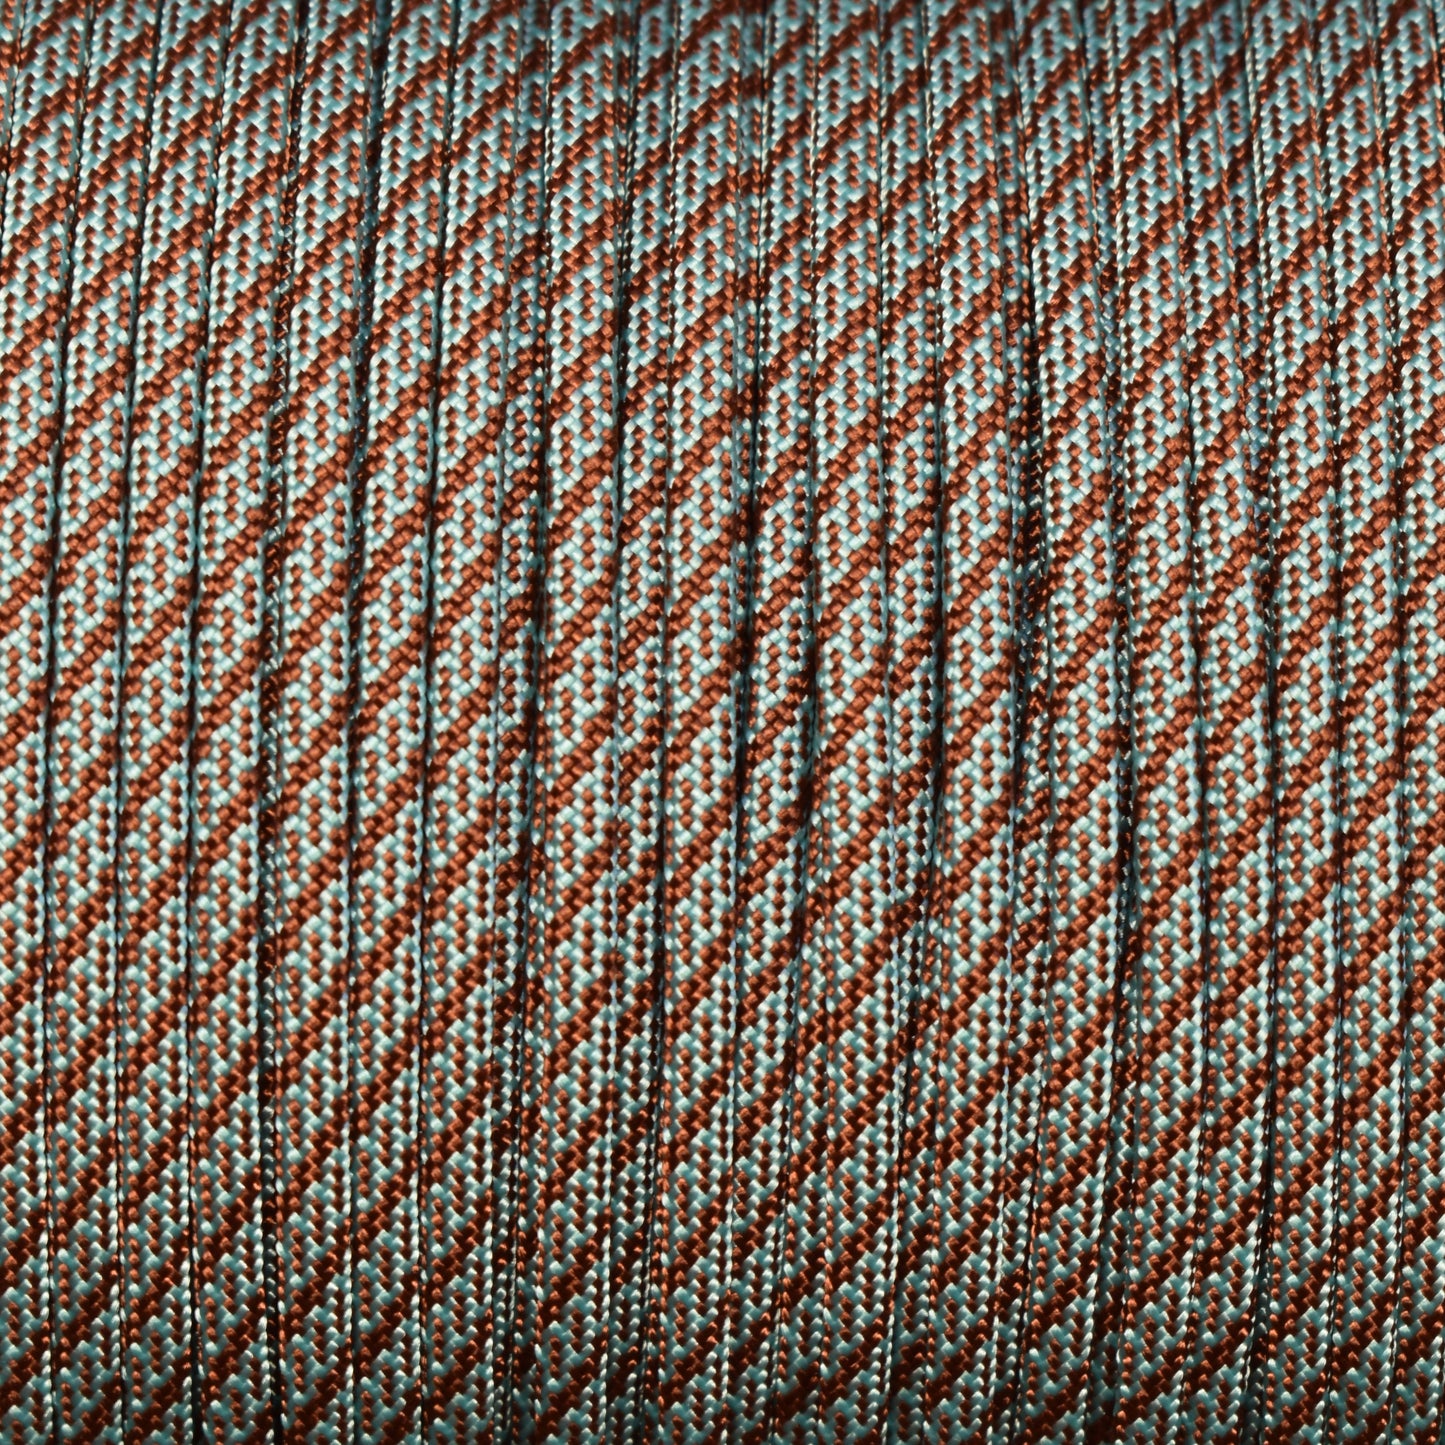 550 Paracord Turquoise with Chocolate Helix Made in the USA Nylon/Nylon (1000 FT.)